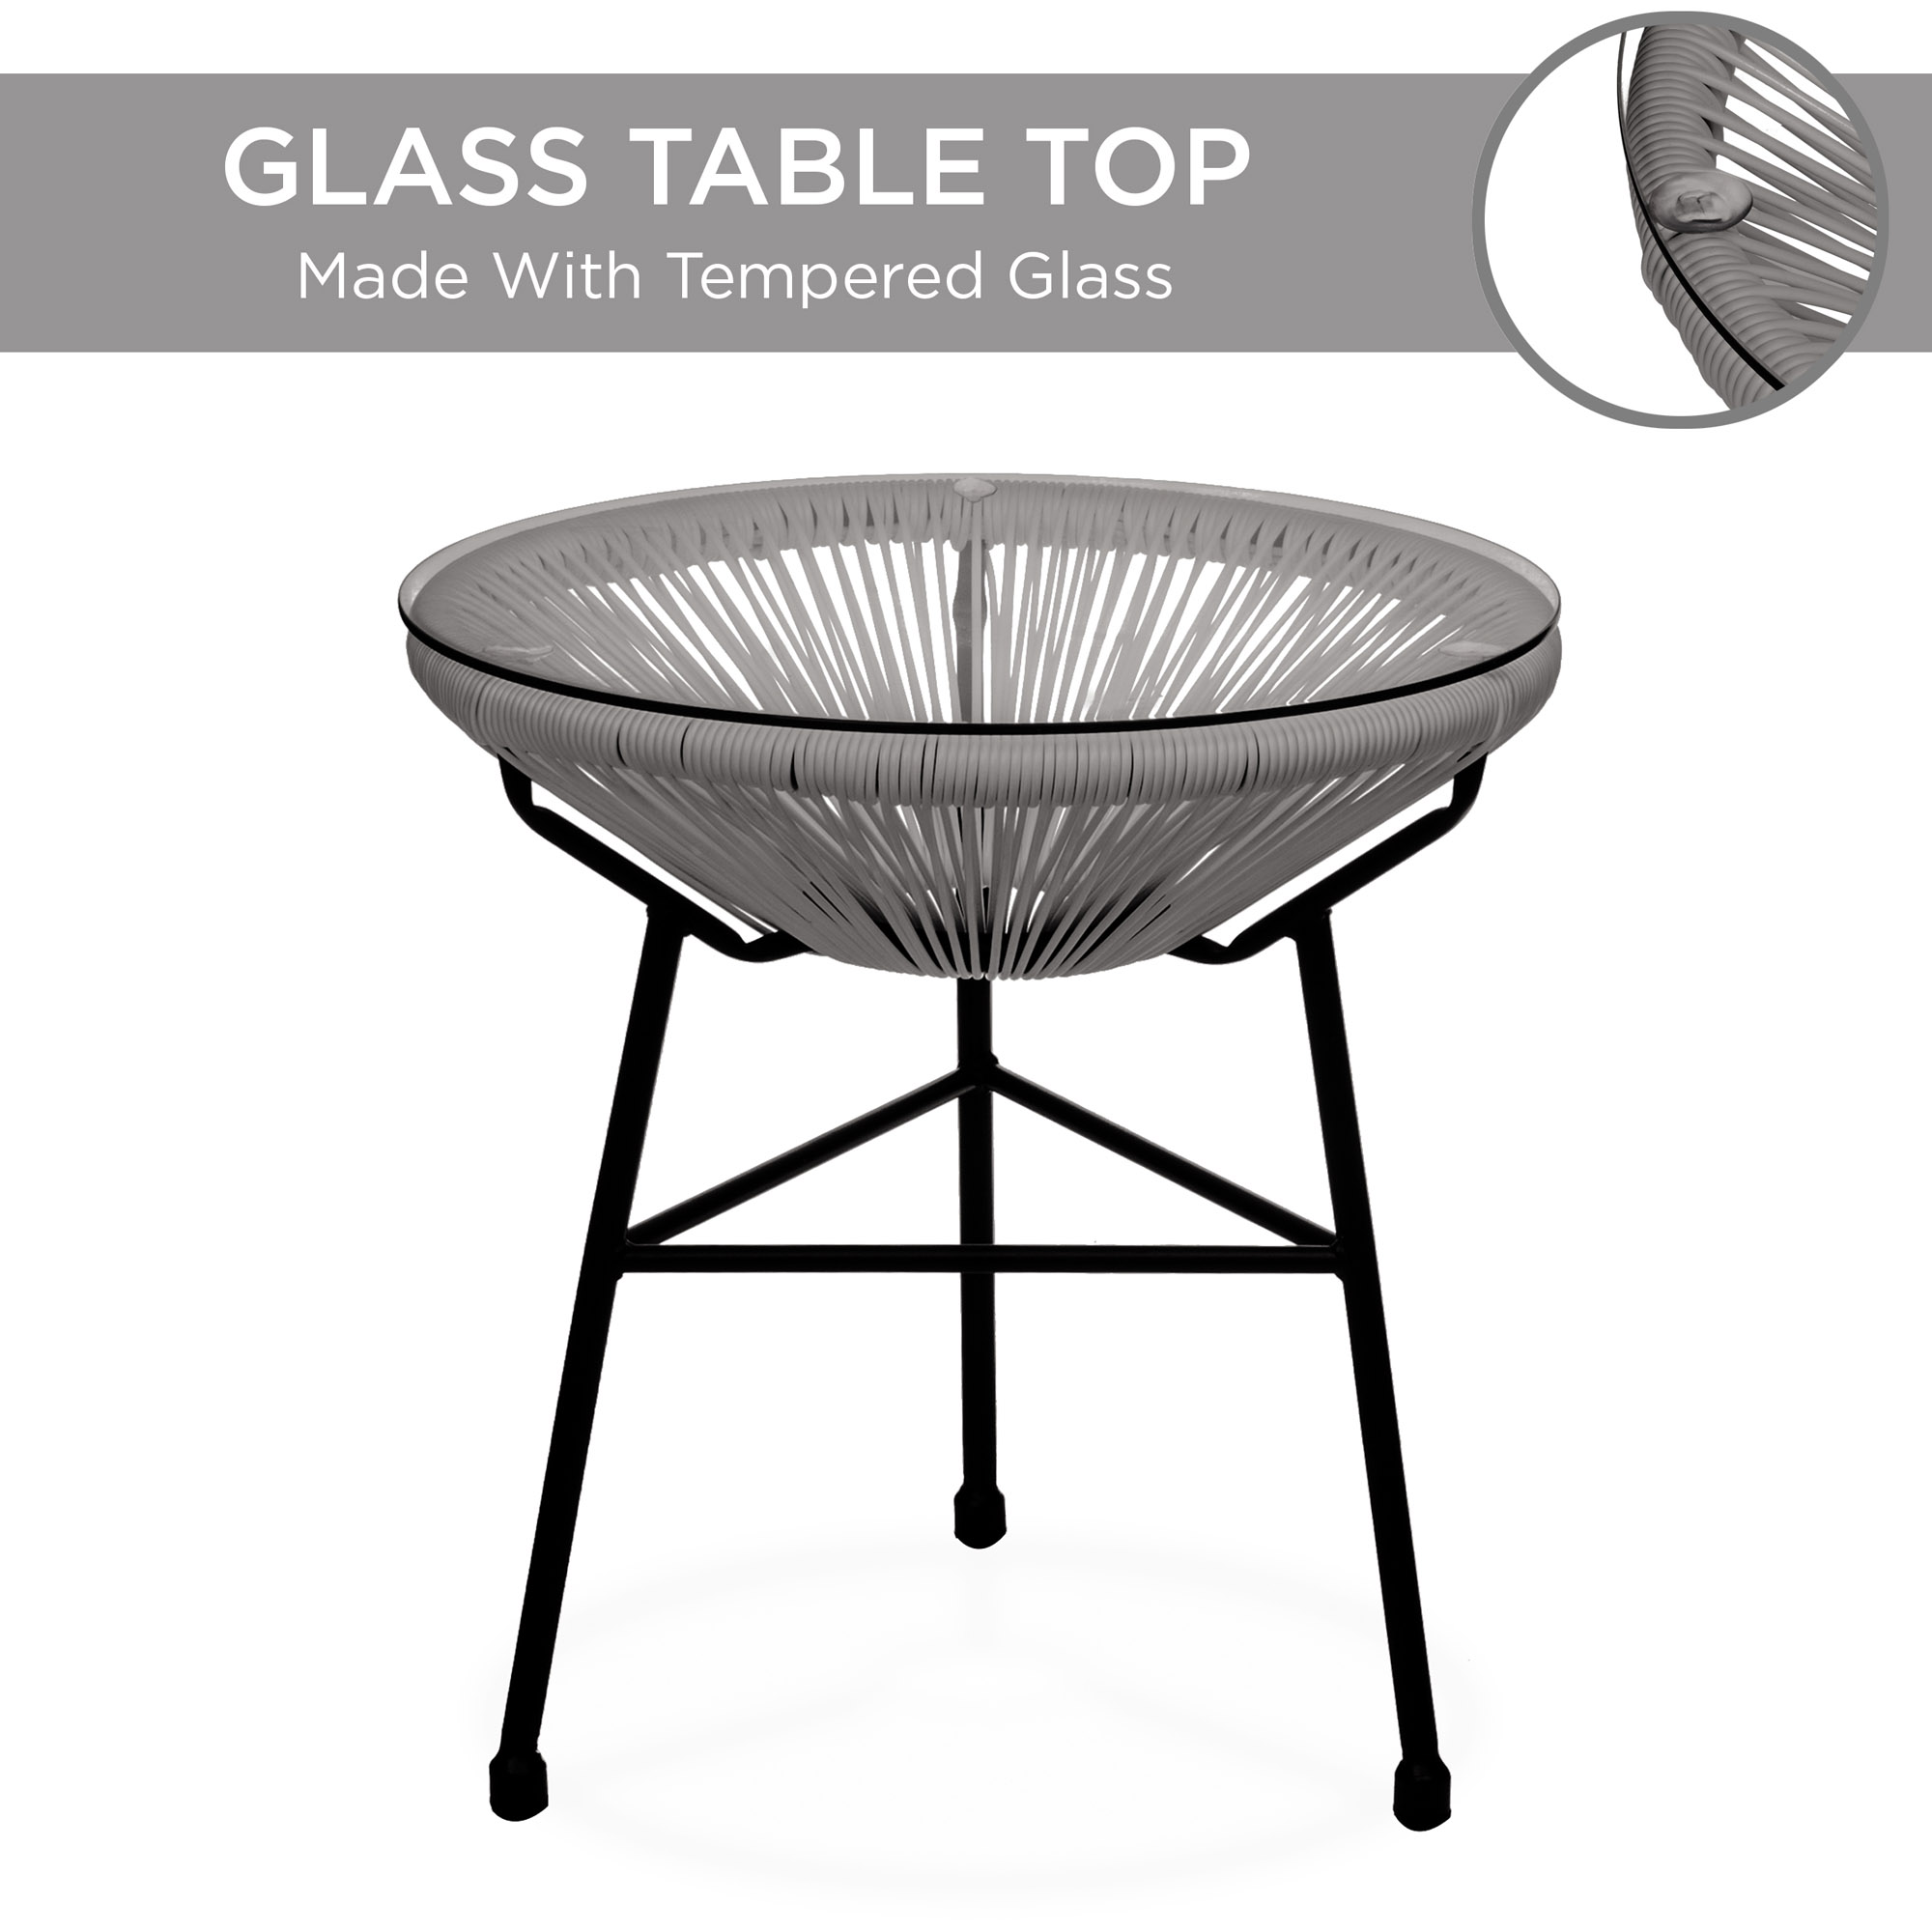 Best Choice Products 3-Piece All-Weather Patio Acapulco Bistro Furniture Set w/ Rope, Glass Top Table - Gray - image 5 of 7